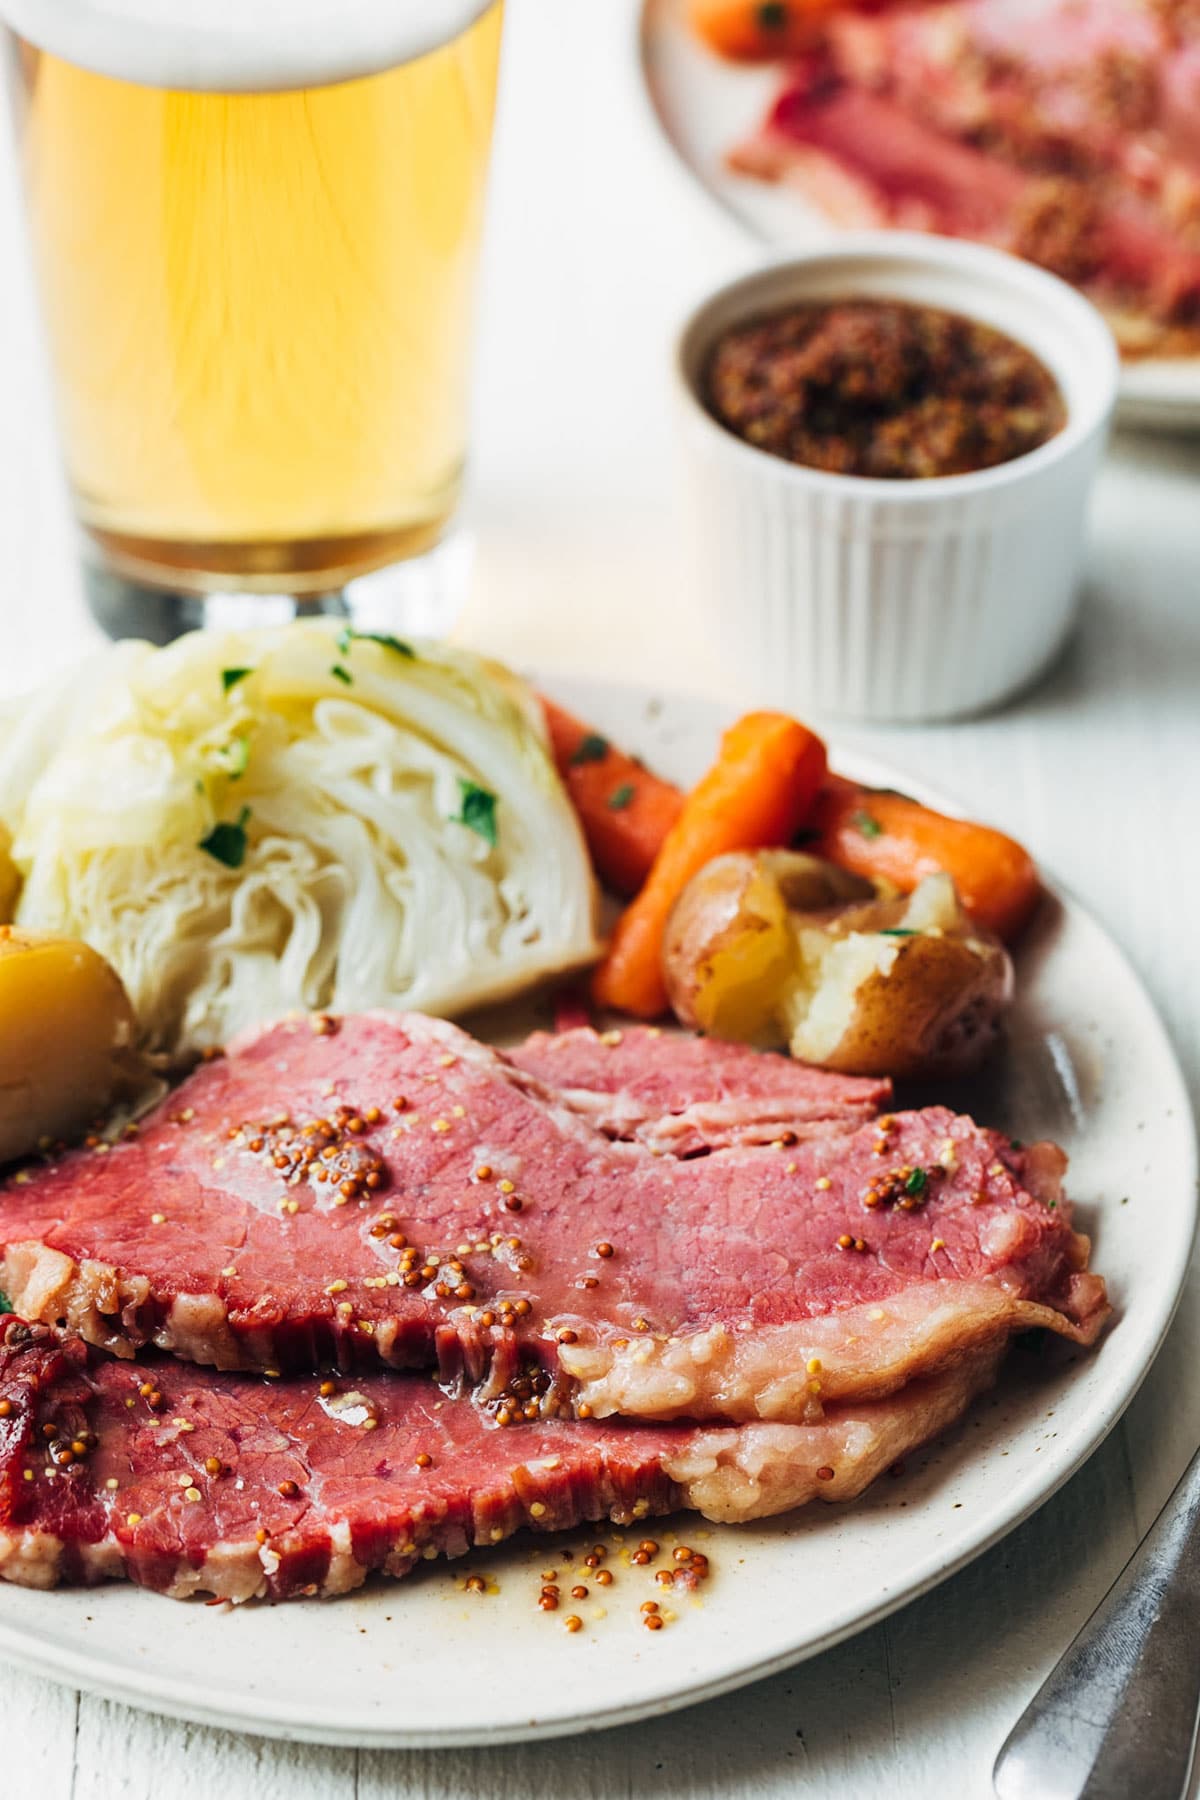 sliced corned beef on an ivory ceramic plate with potatoes, carrots, and cabbage